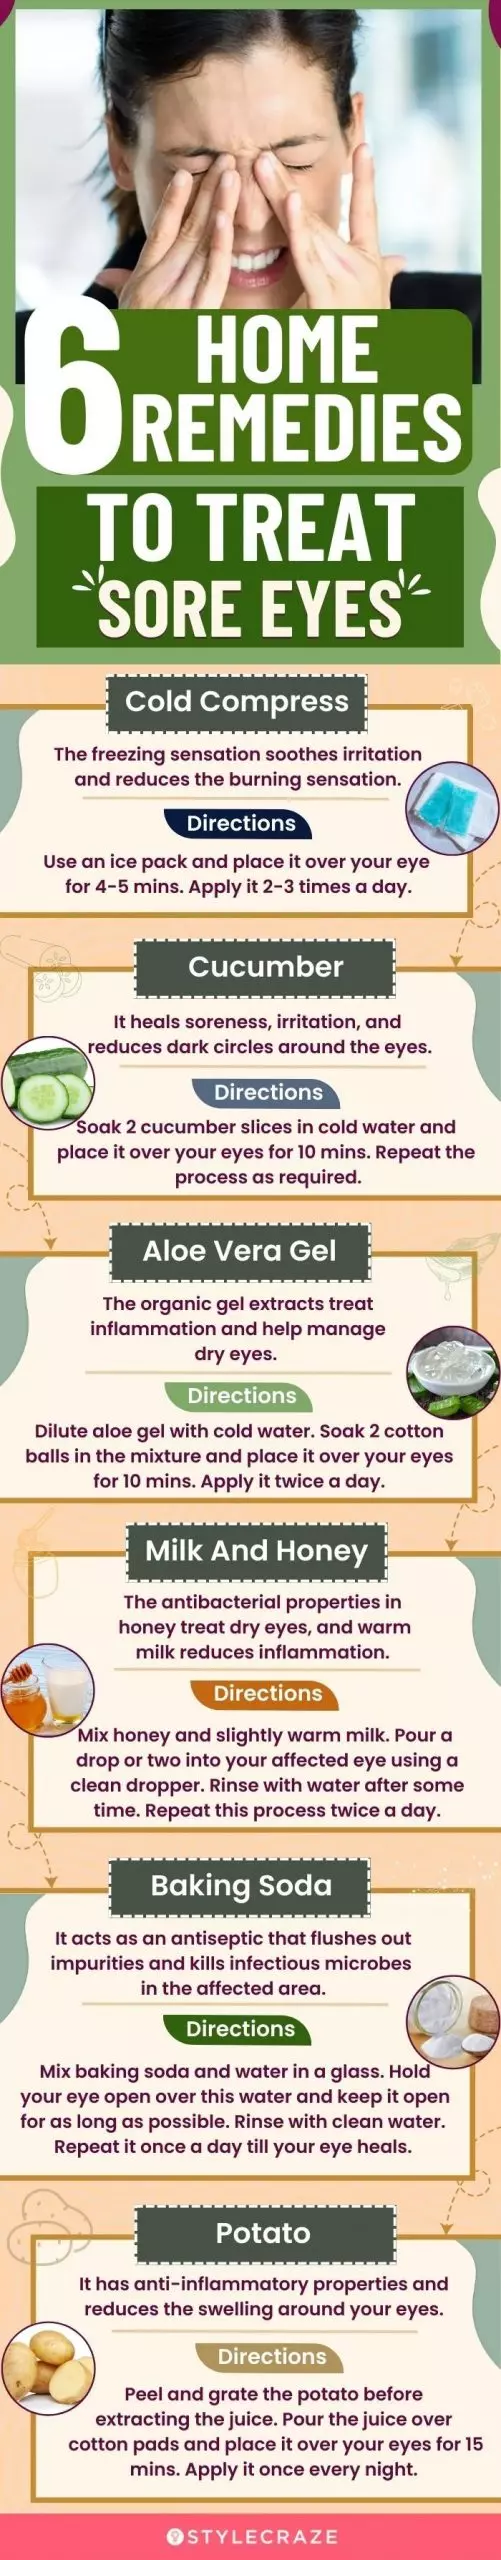 6 home remedies to treat sore eyes (infographic)